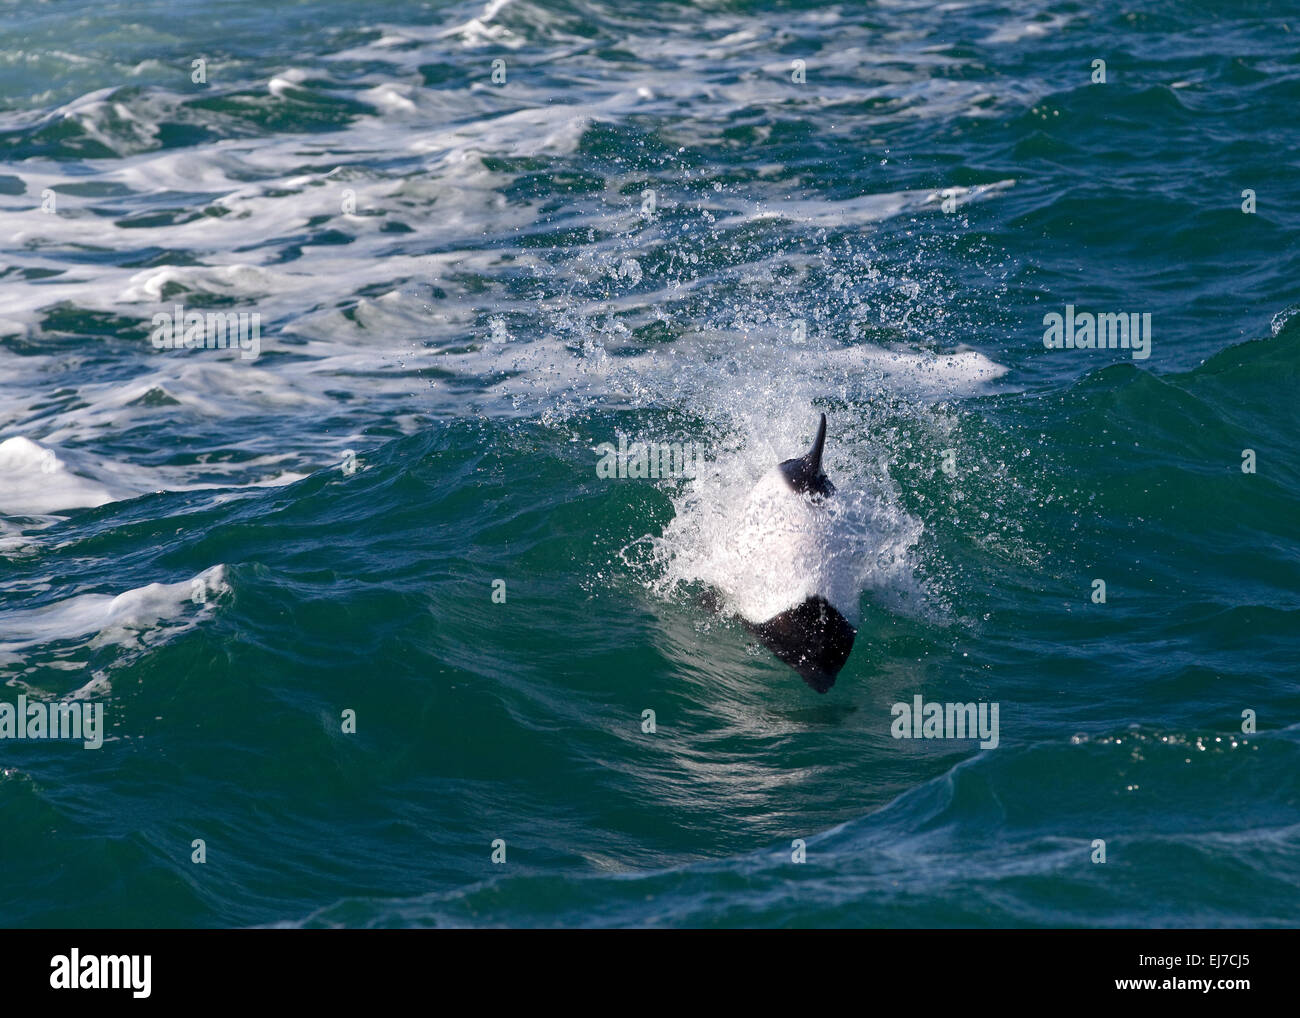 Commerson's Dolphin porpoises in a wave Stock Photo